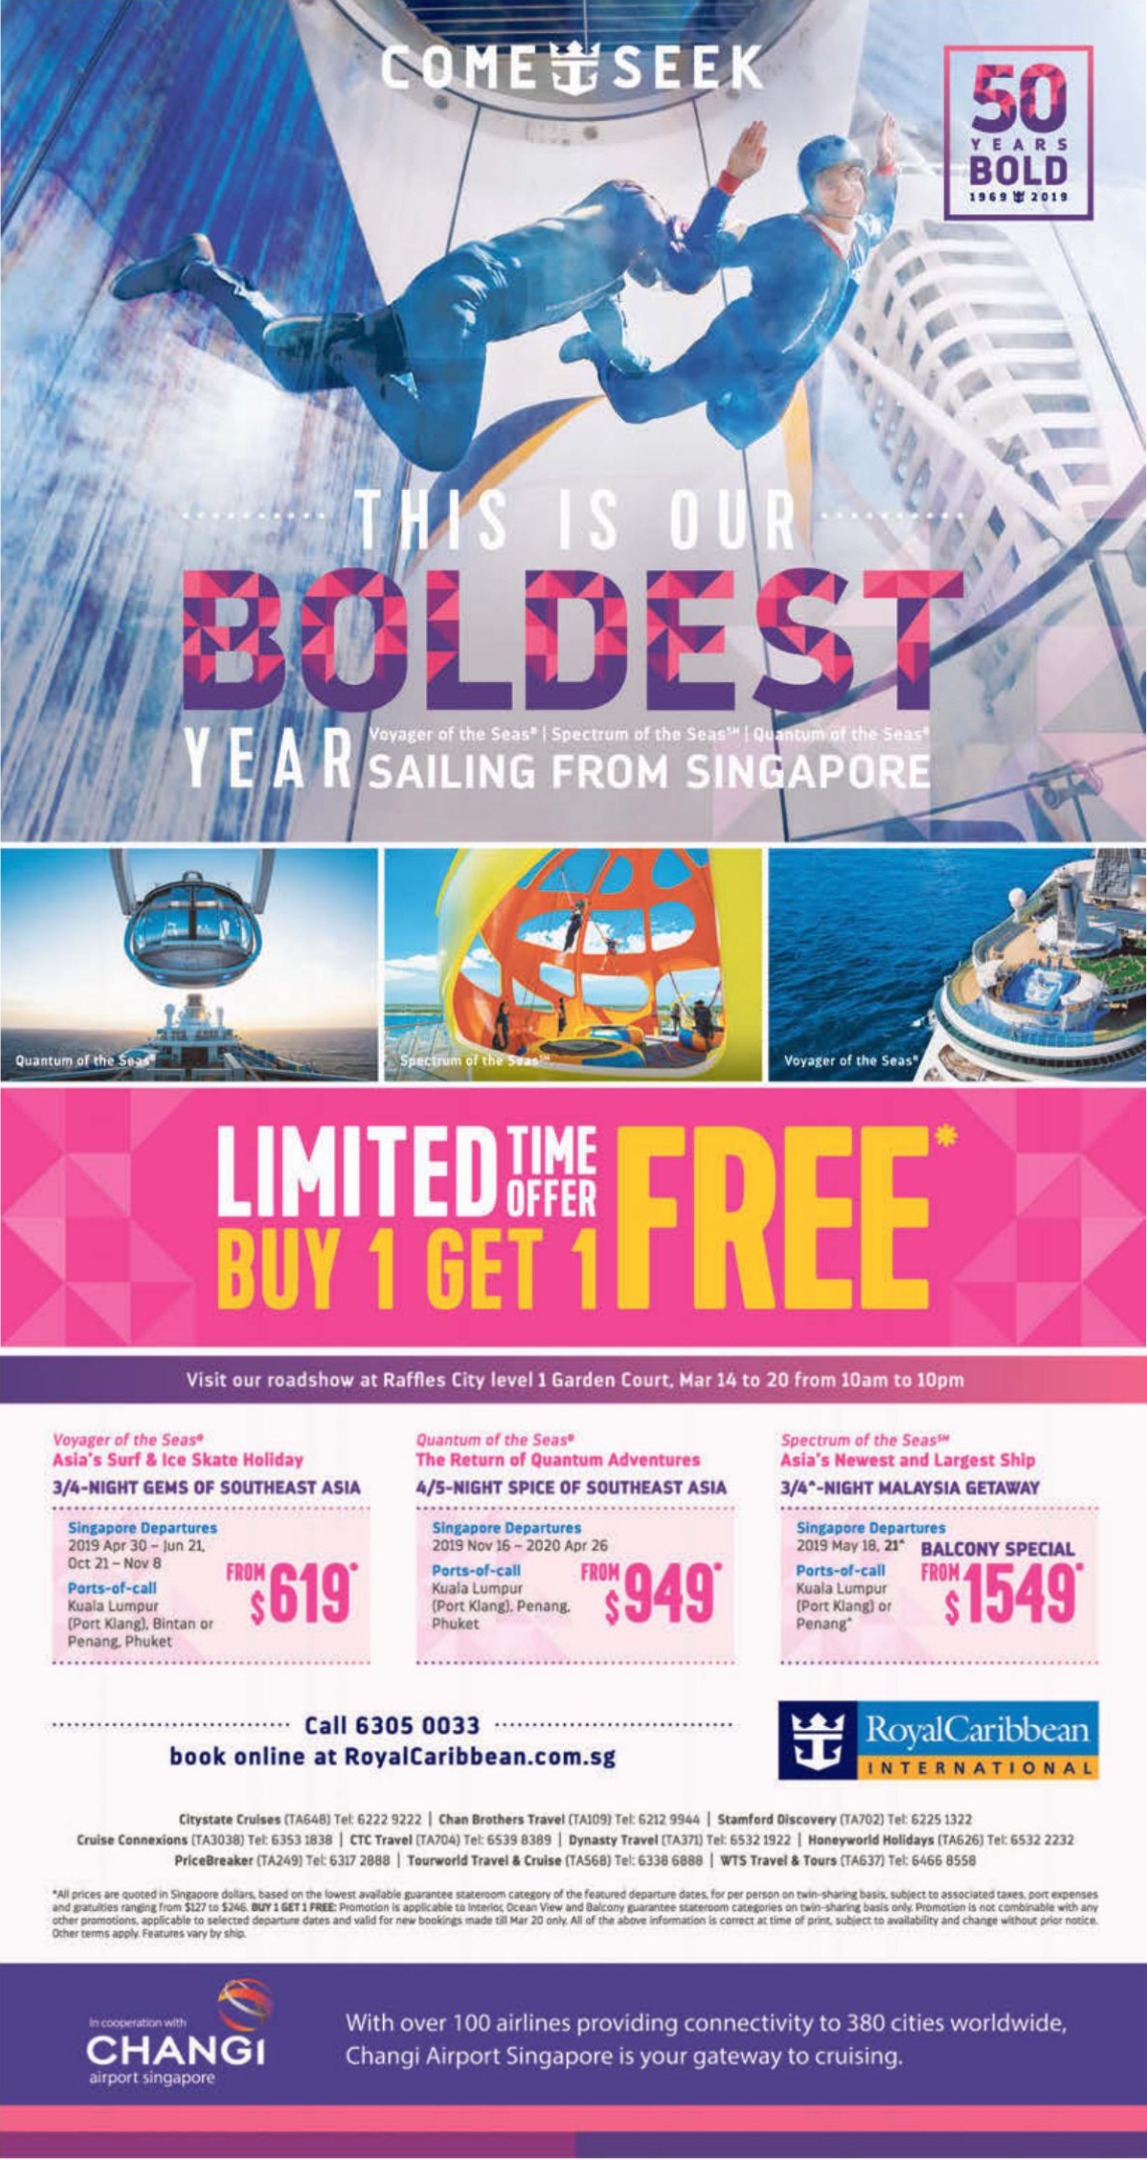 Royal Caribbean International having a limited-time “Buy-1-Get-1-Free” offer from now till 20 Mar 2019 - 1